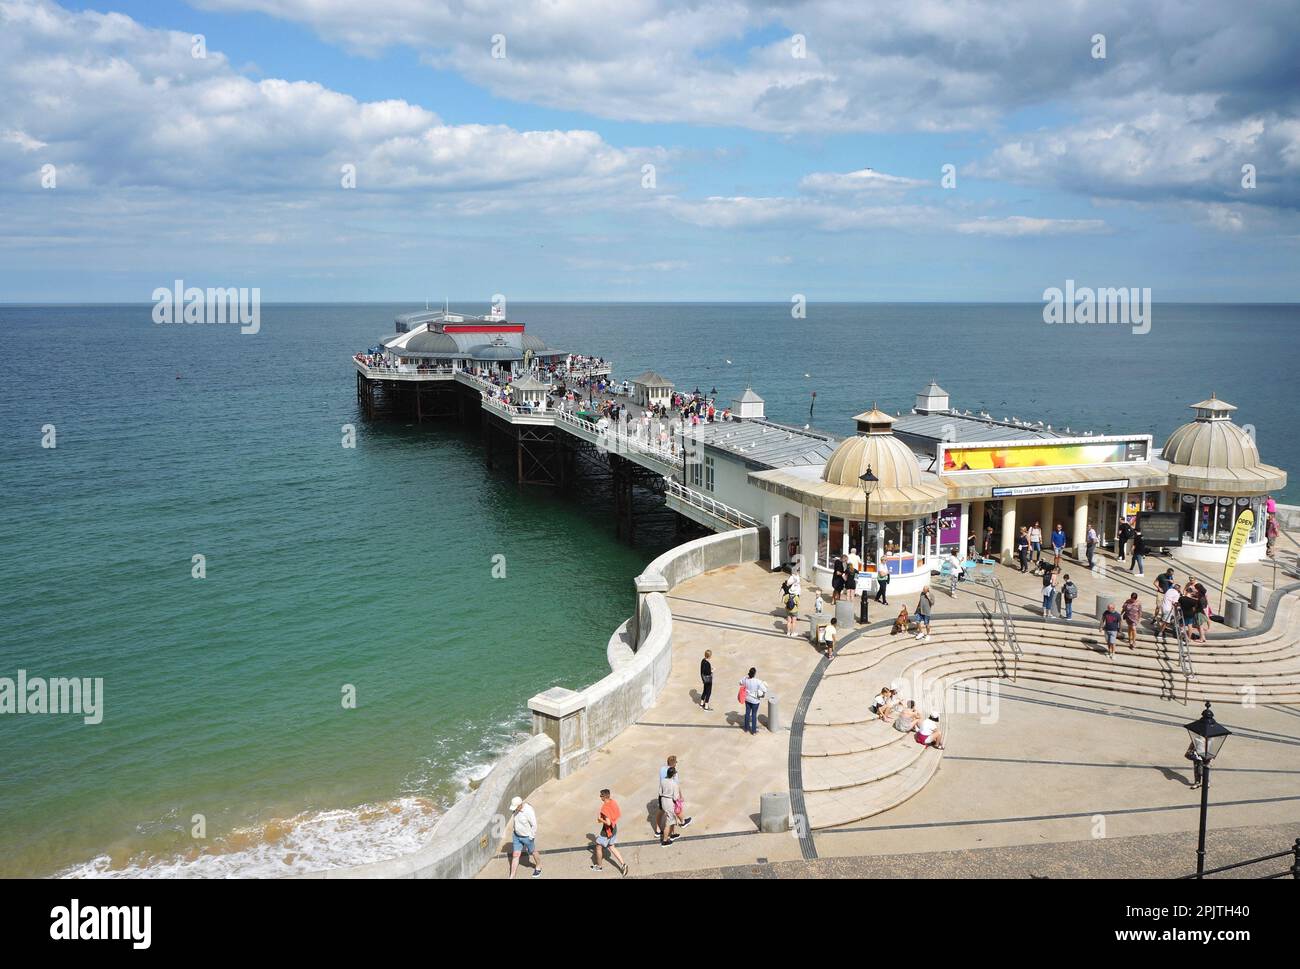 Overhead view of the pier at an English seaside resort Stock Photo